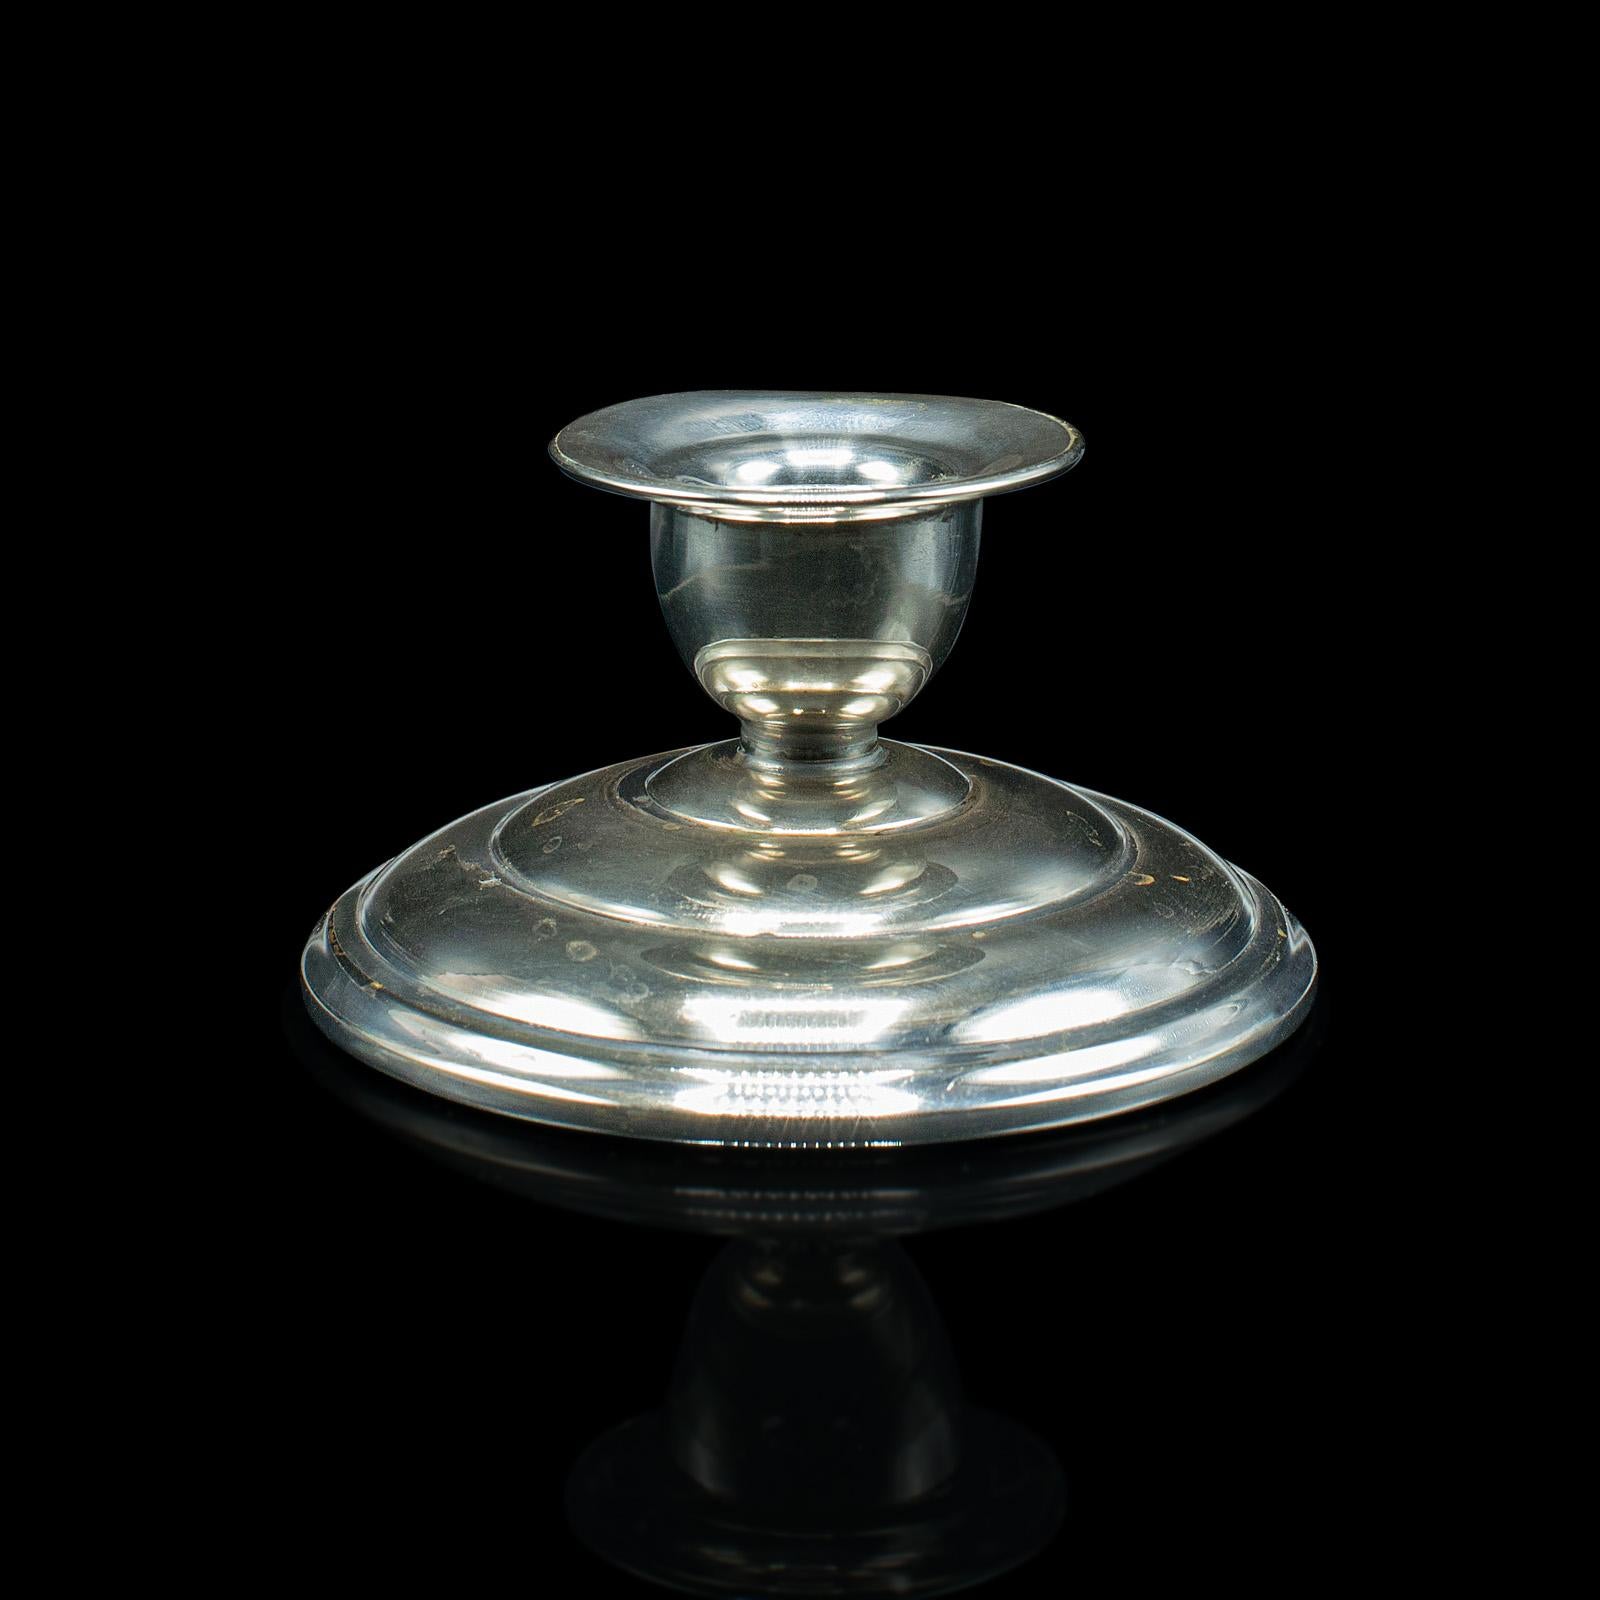 British Antique Parson's Candle Holder, English Silver Plate Nozzle, Ink Well, Victorian For Sale